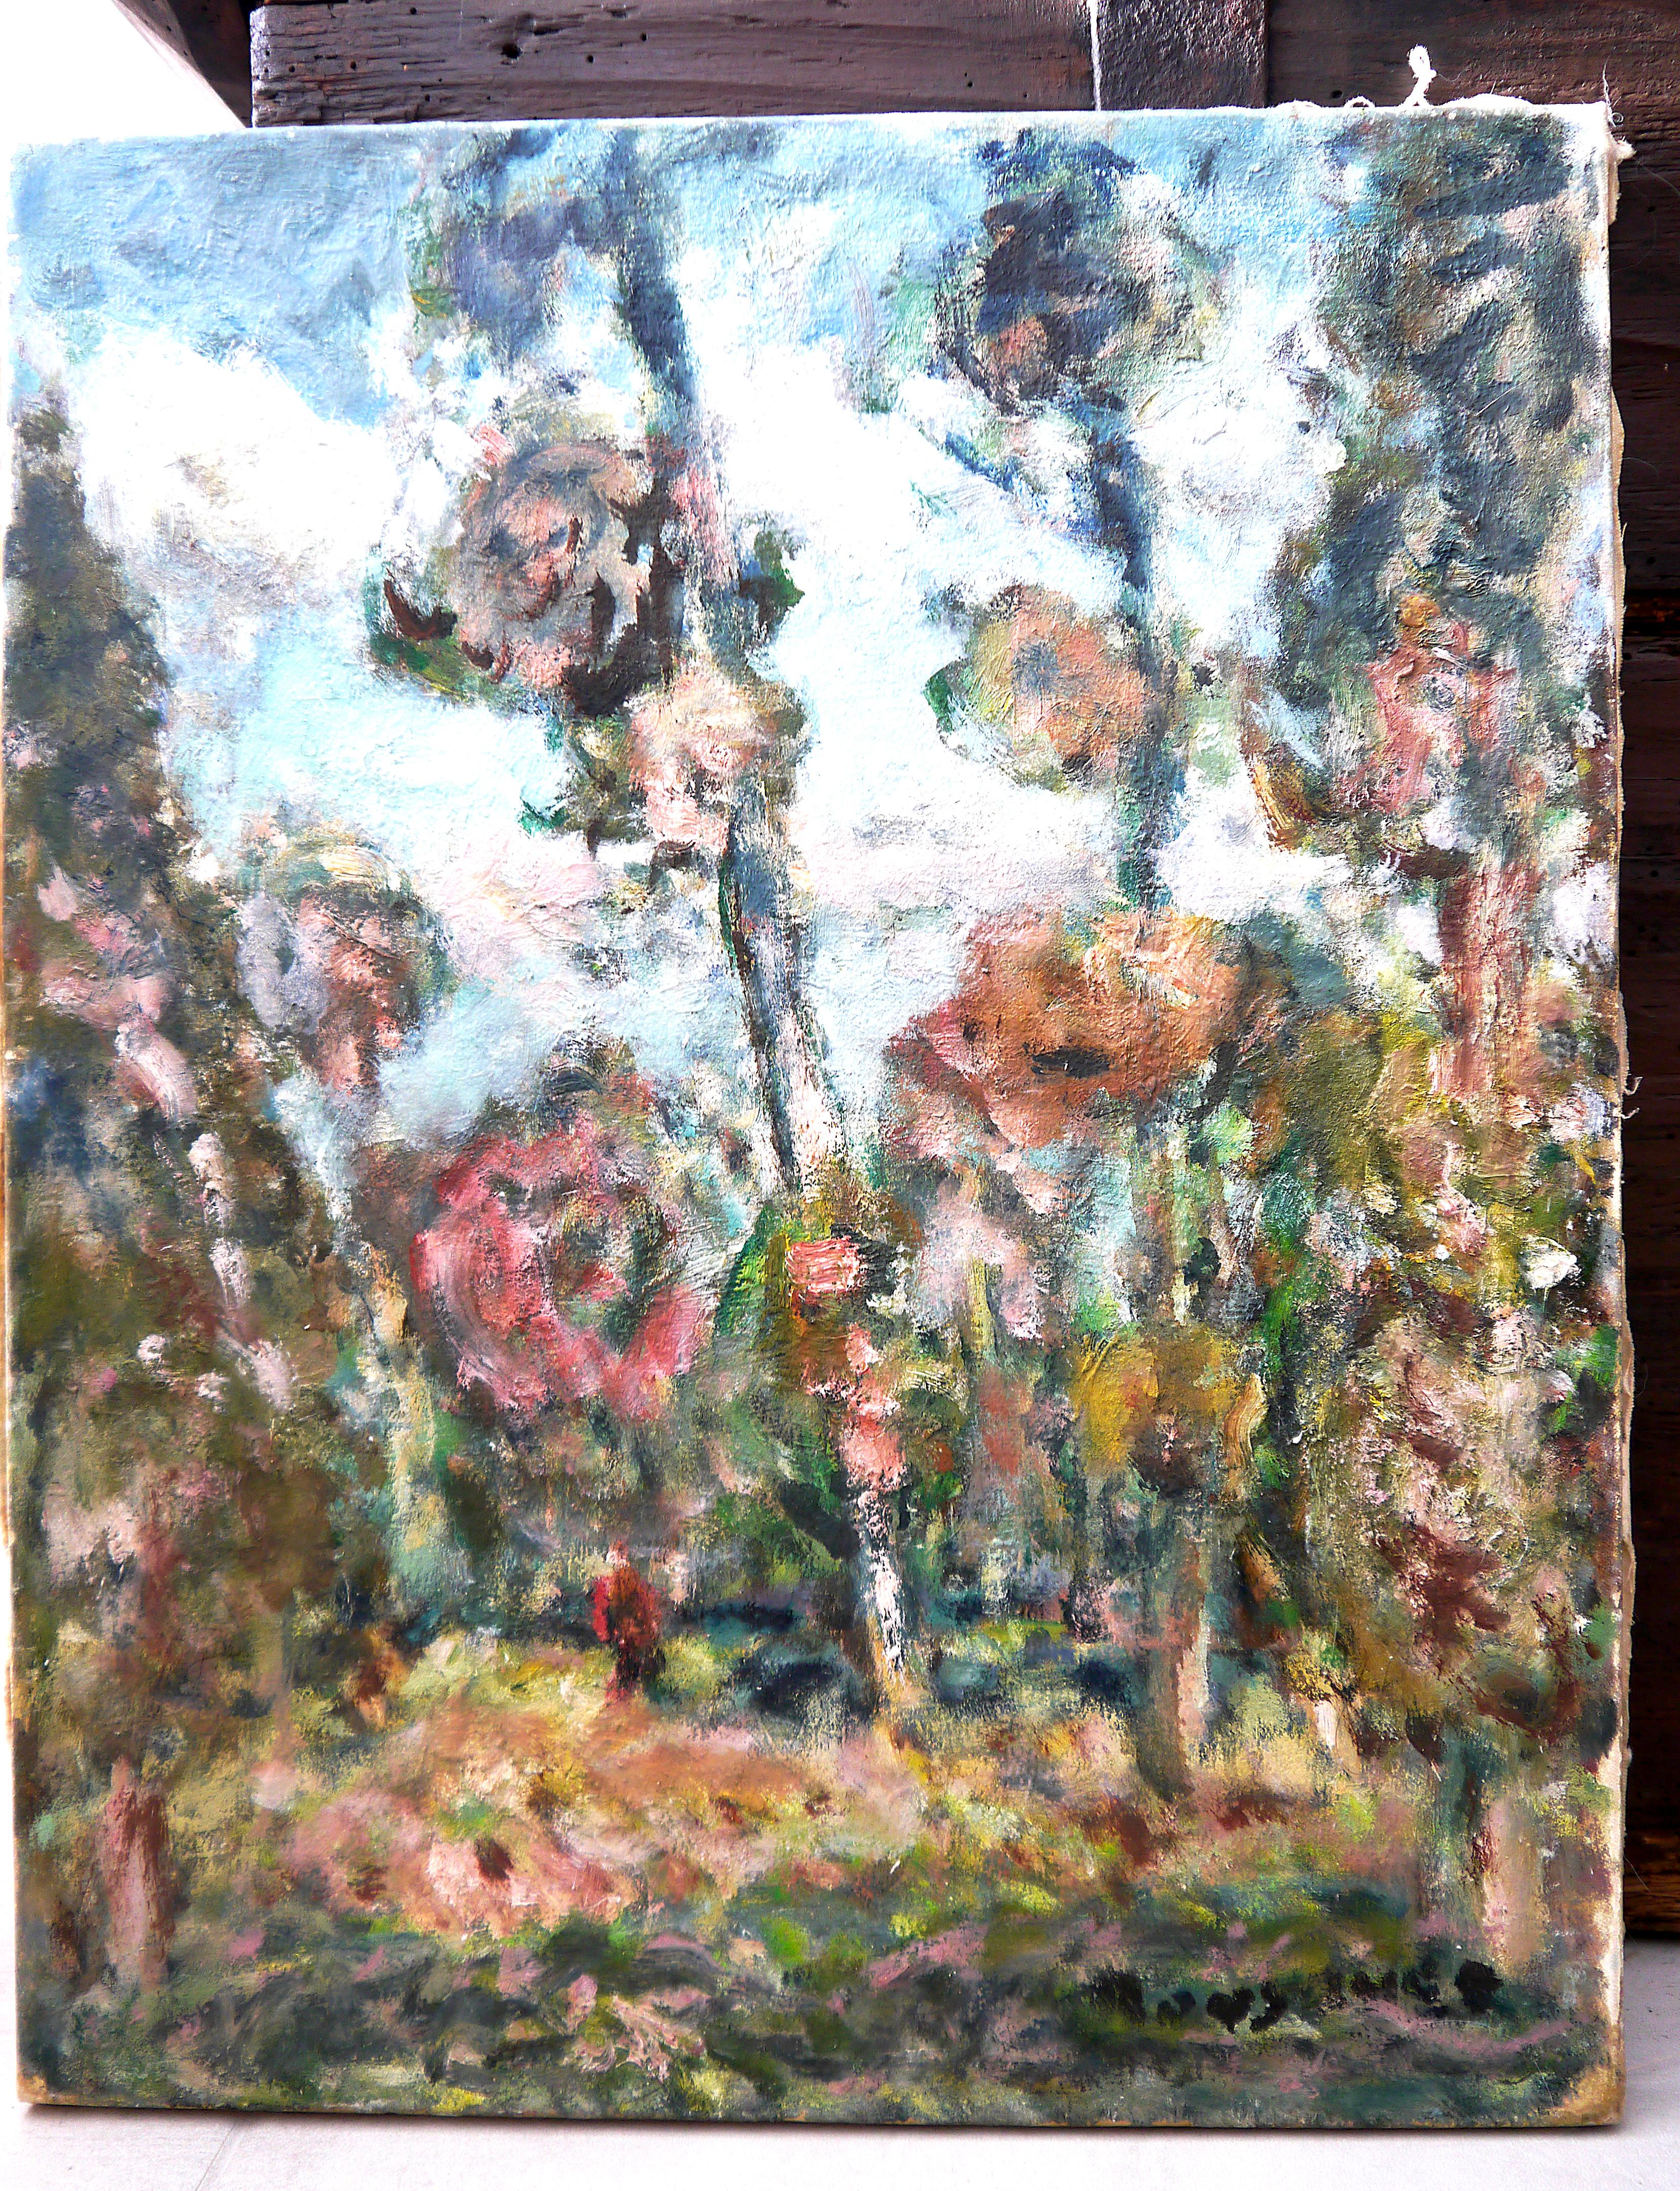 Landscape  of Fontainebleau 

Georges Bousquet Moret  (1904-1976)  was, first, an engineer passionate about arts. This passion led him to devote his free time to visiting museums and he bought canvases, tubes of paint and sketchbooks.

The first